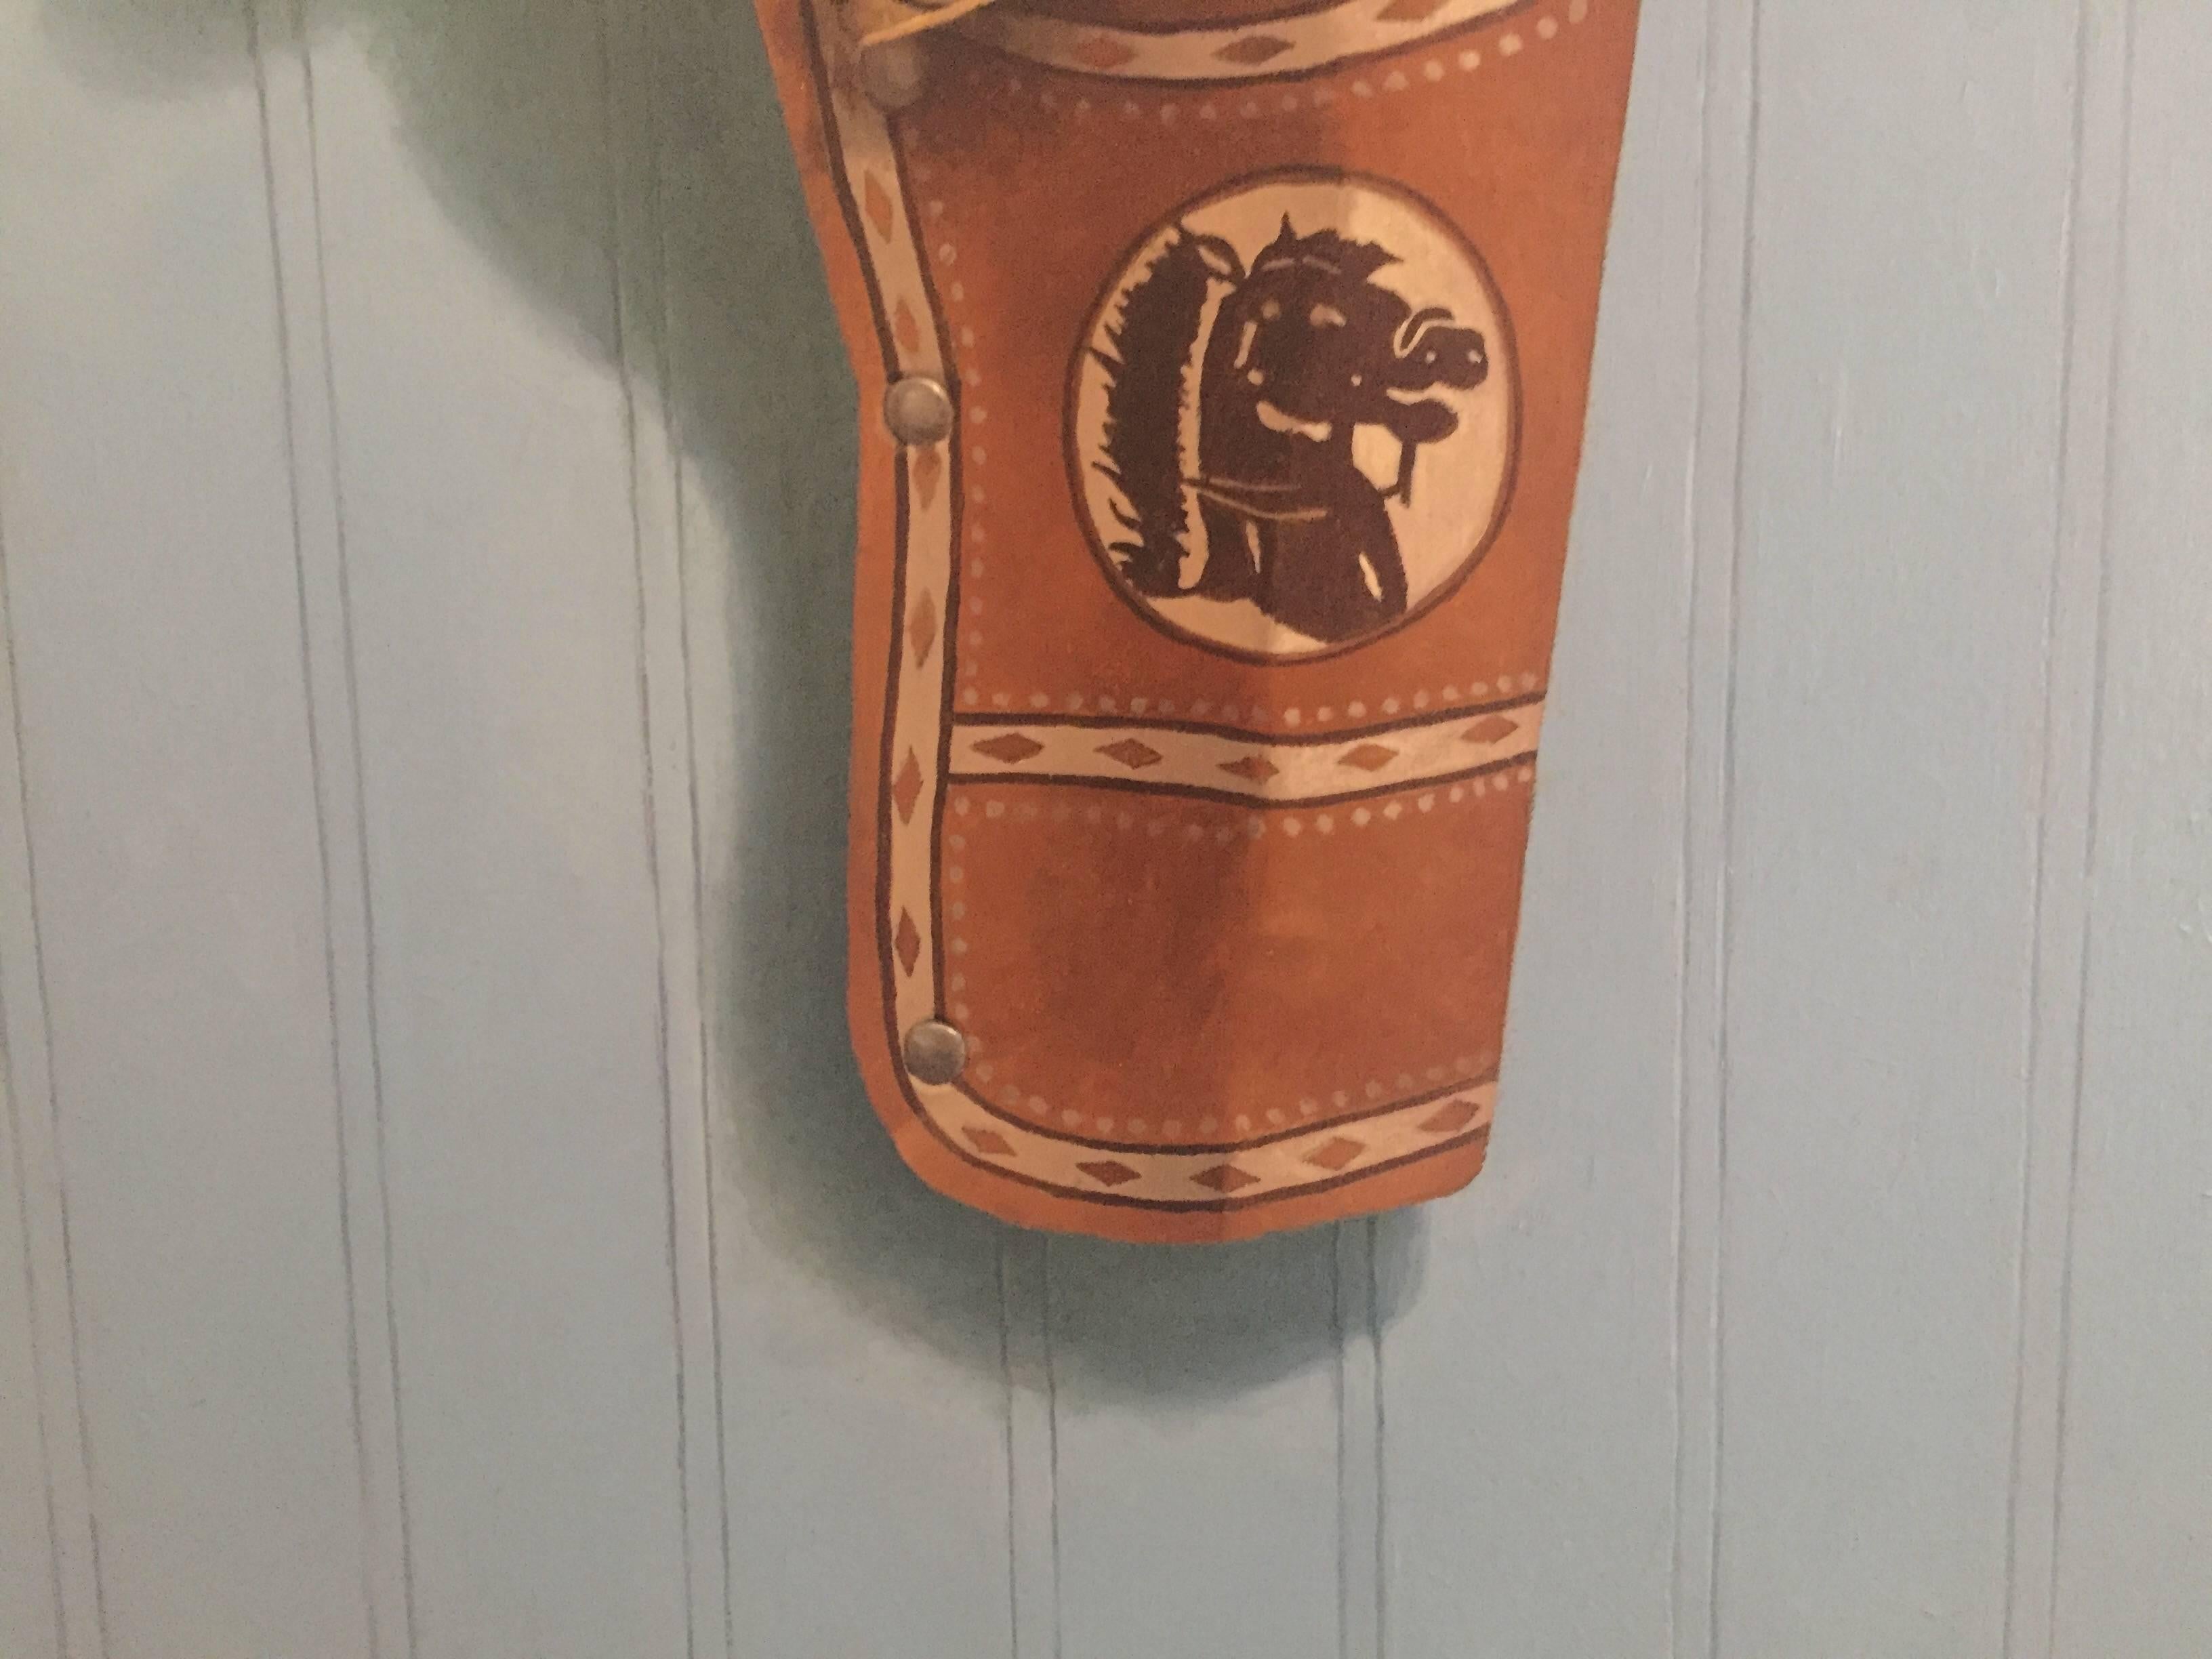 Painted from life in his studio, John Morfis paints with a proclivity for precision; Trompe l'oeil. A toy gun peeks out of it's leather holster which hangs from a nail on a pale blue wall. 

BIOGRAPHY

John Morfis was born in Glen Cove, Long Island